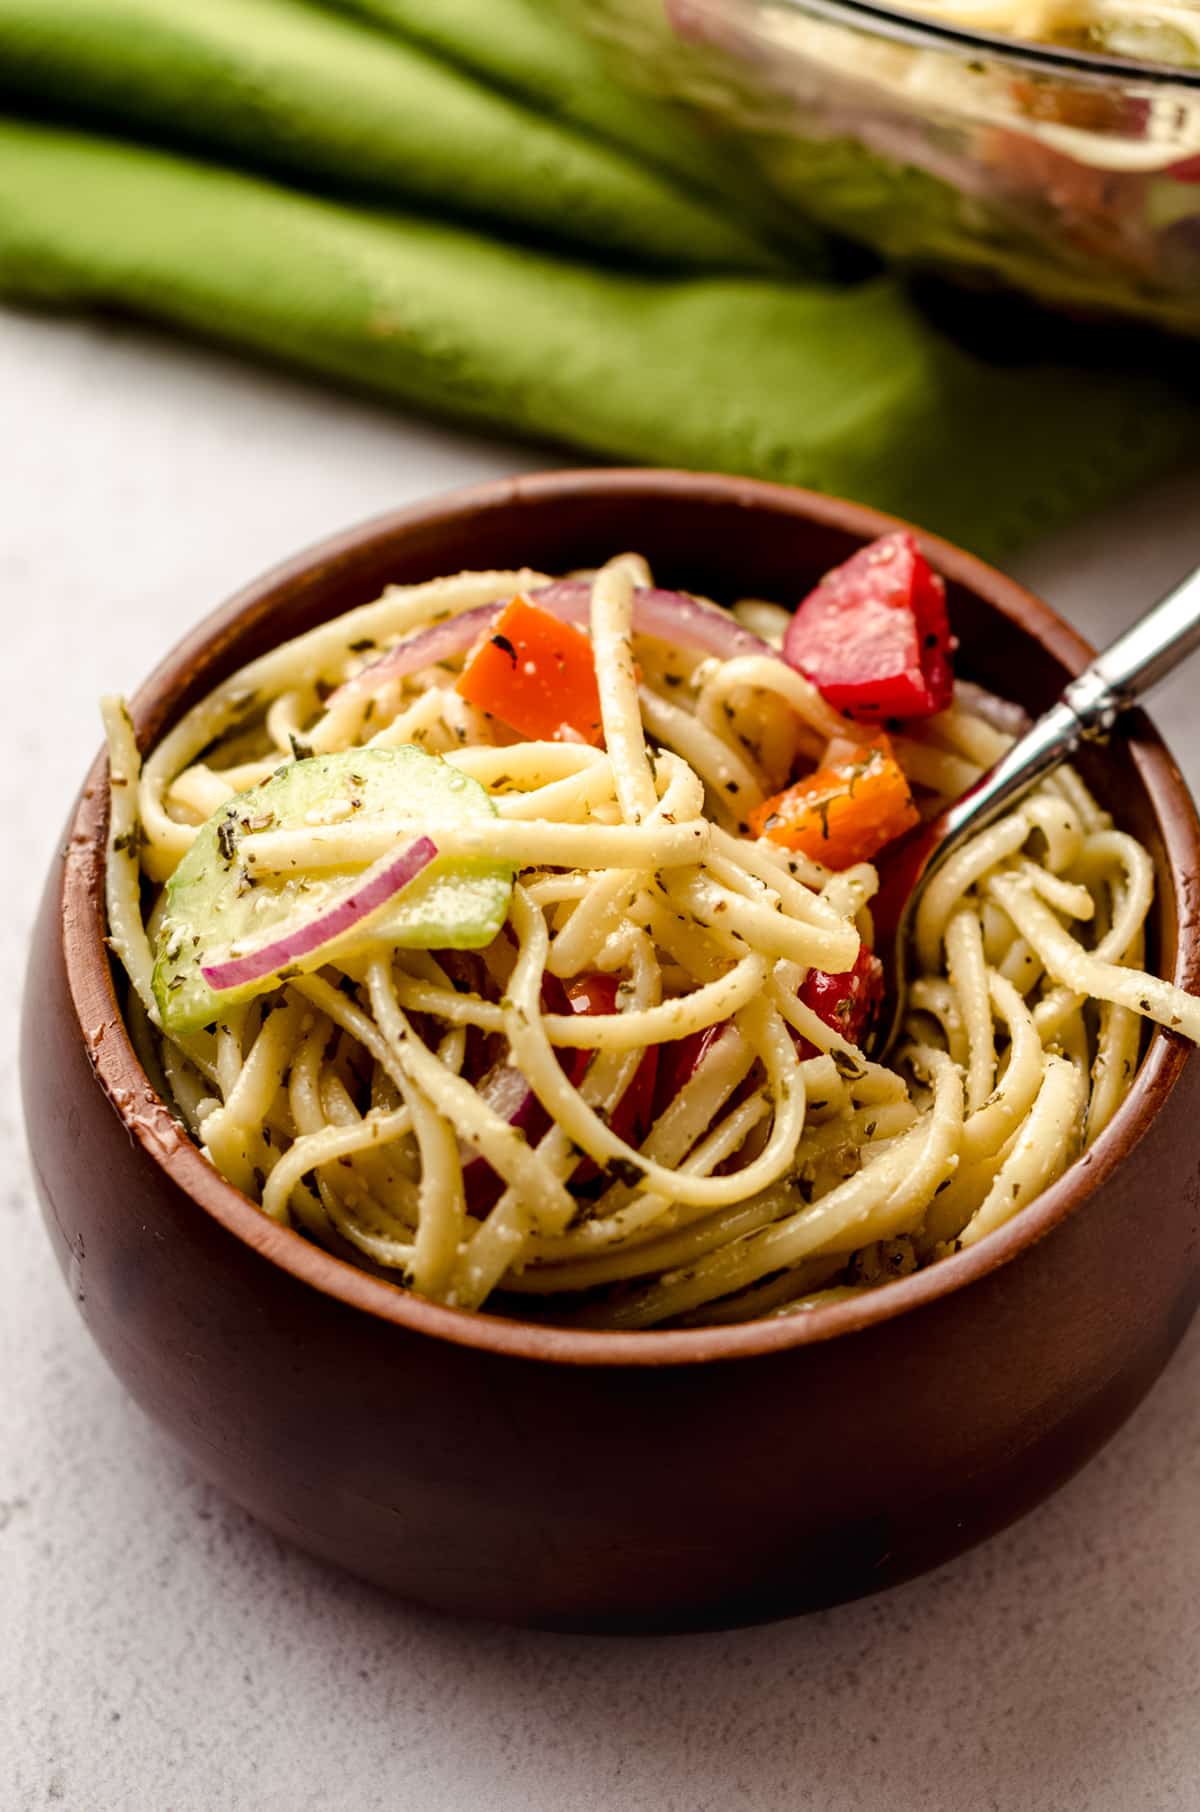 A small wooden bowl filled with a spaghetti salad.